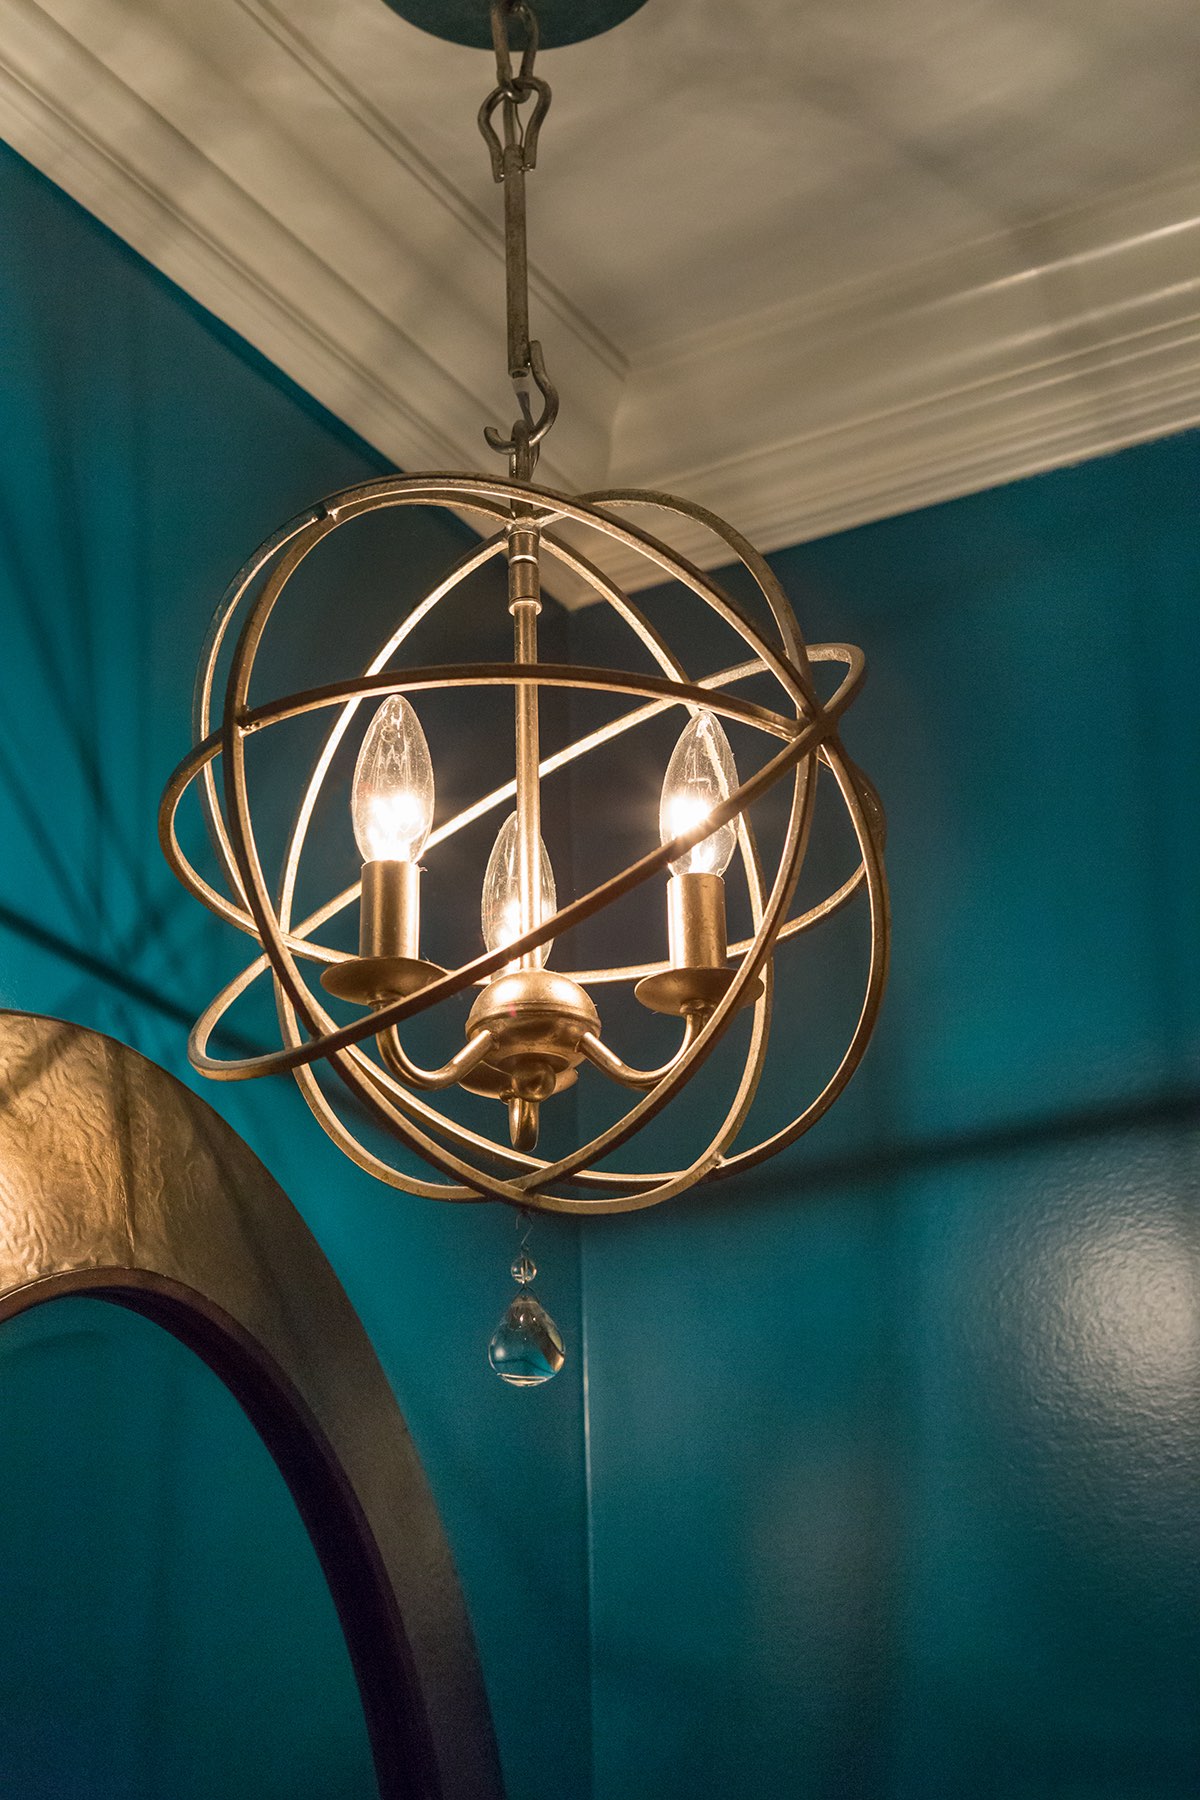 Powder room pendant lamp with freeform brass cage shade